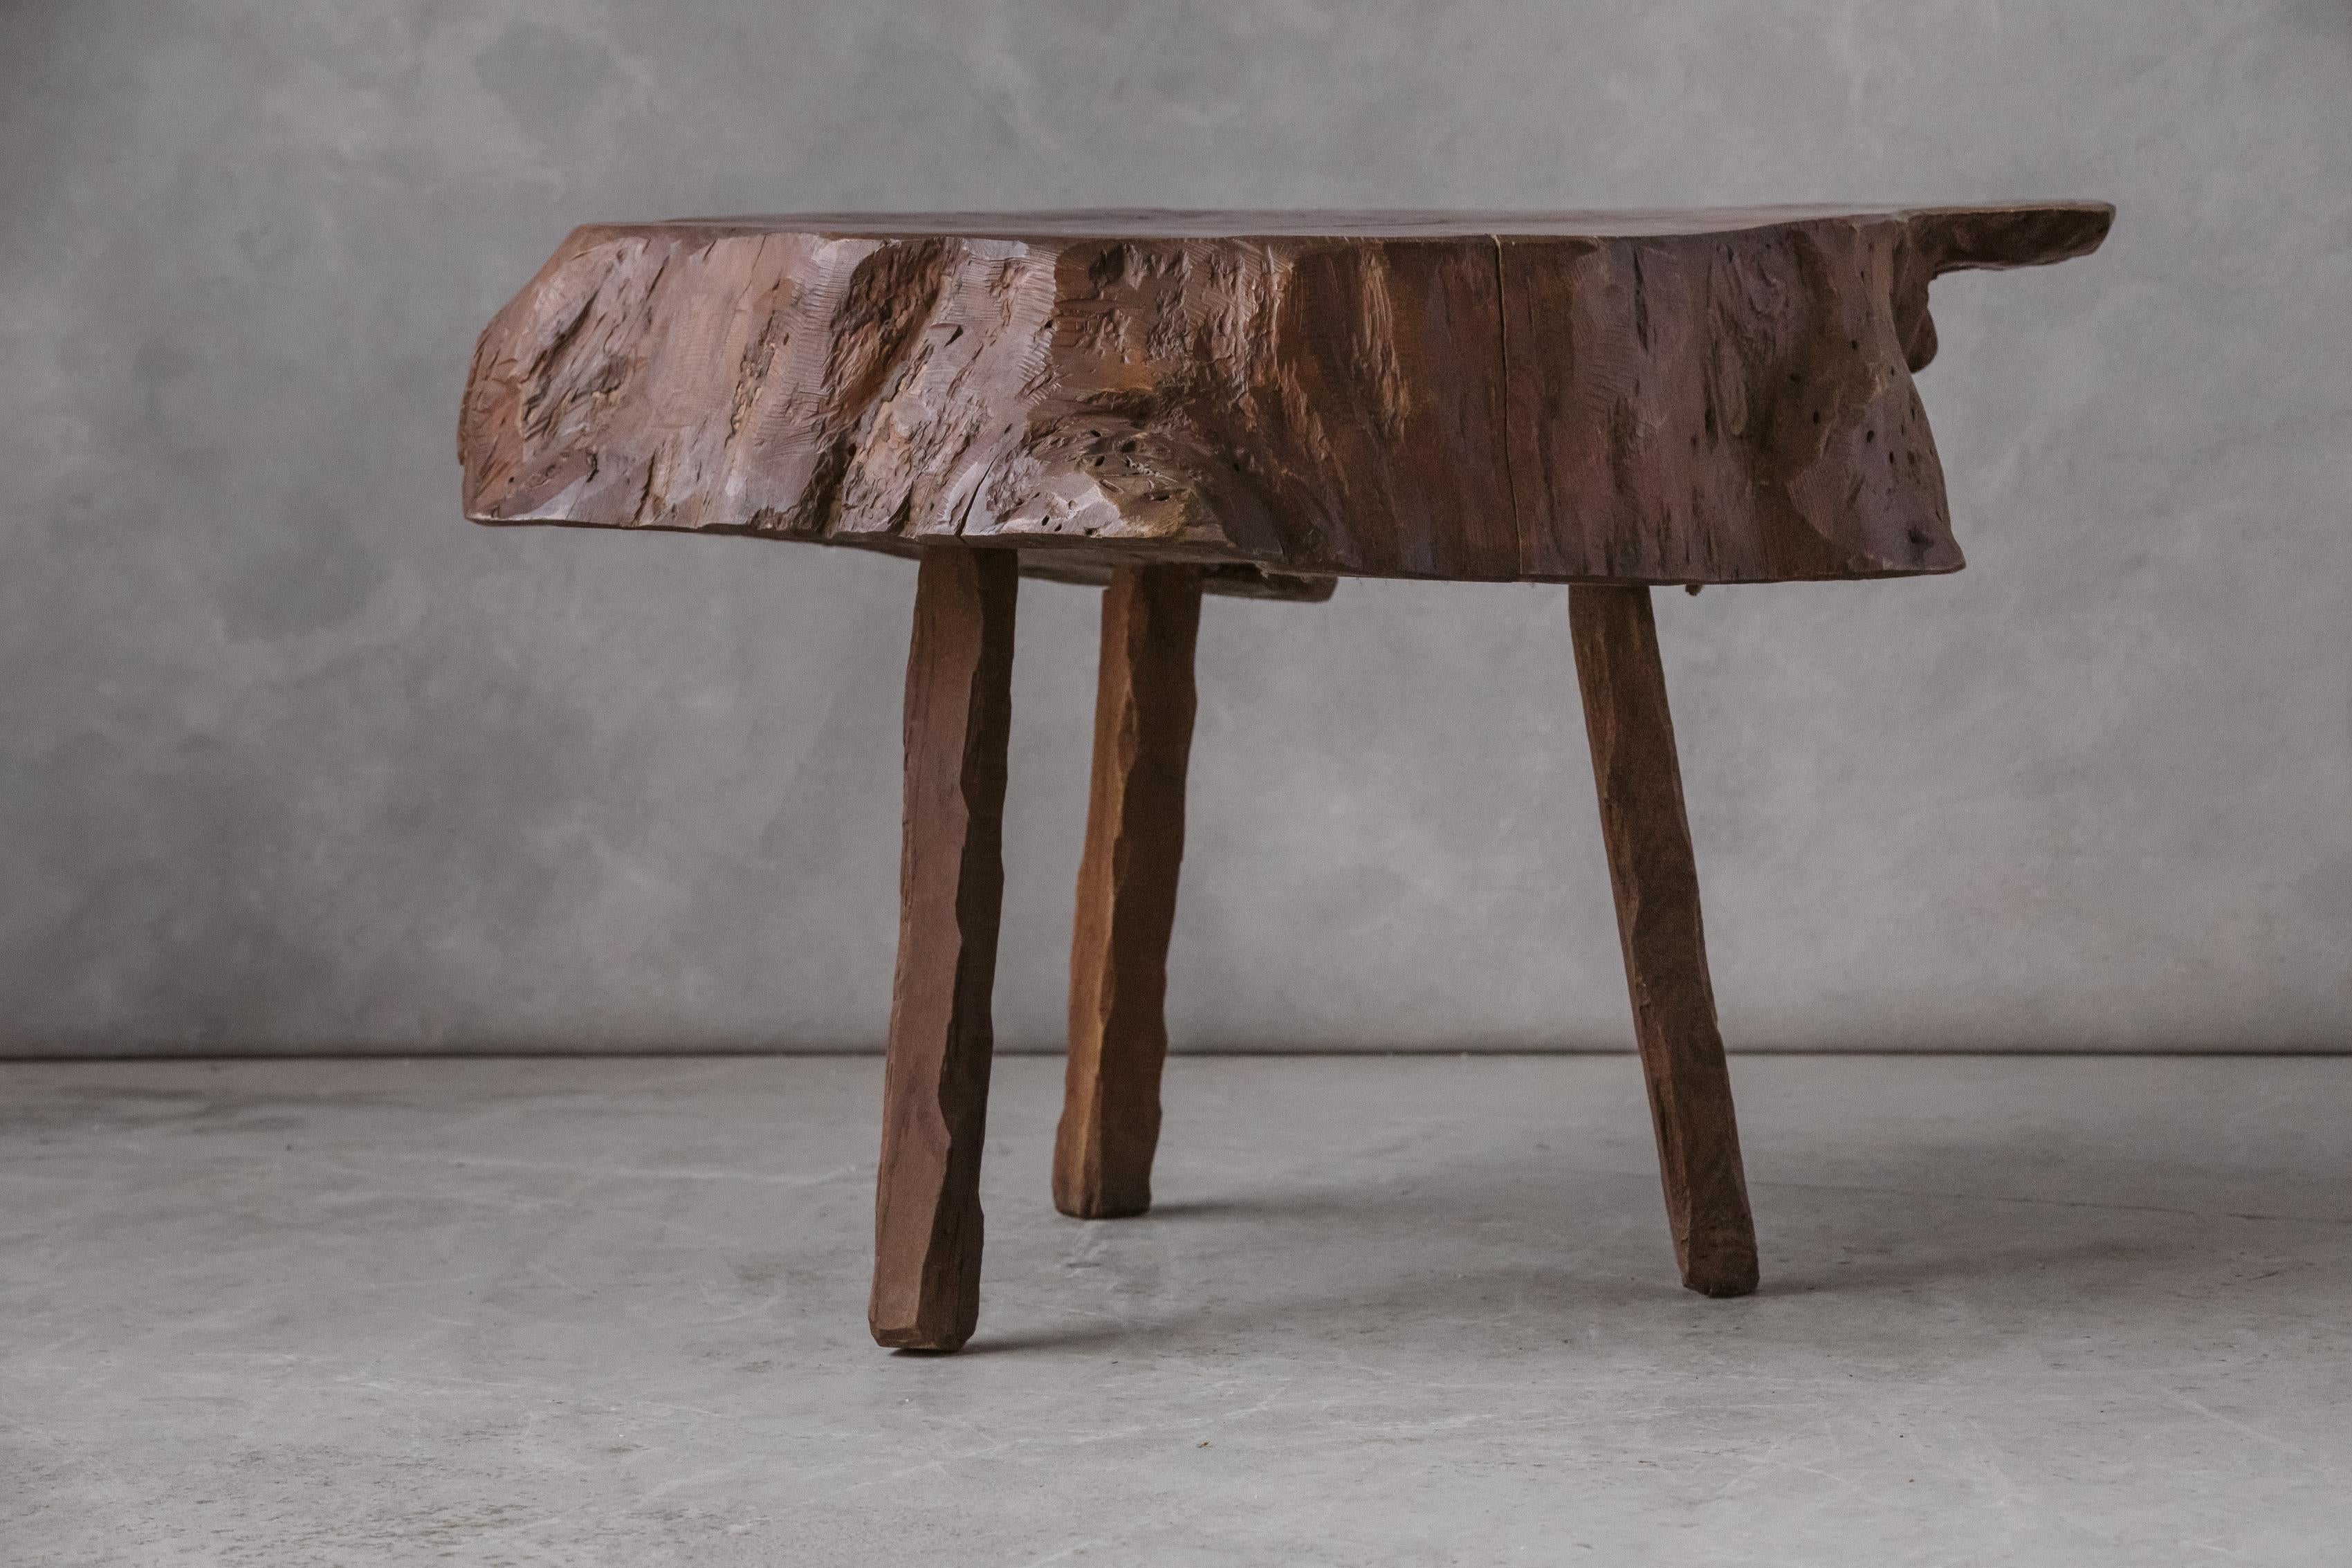 European Vintage Live Edge Coffee Table from France, circa 1960